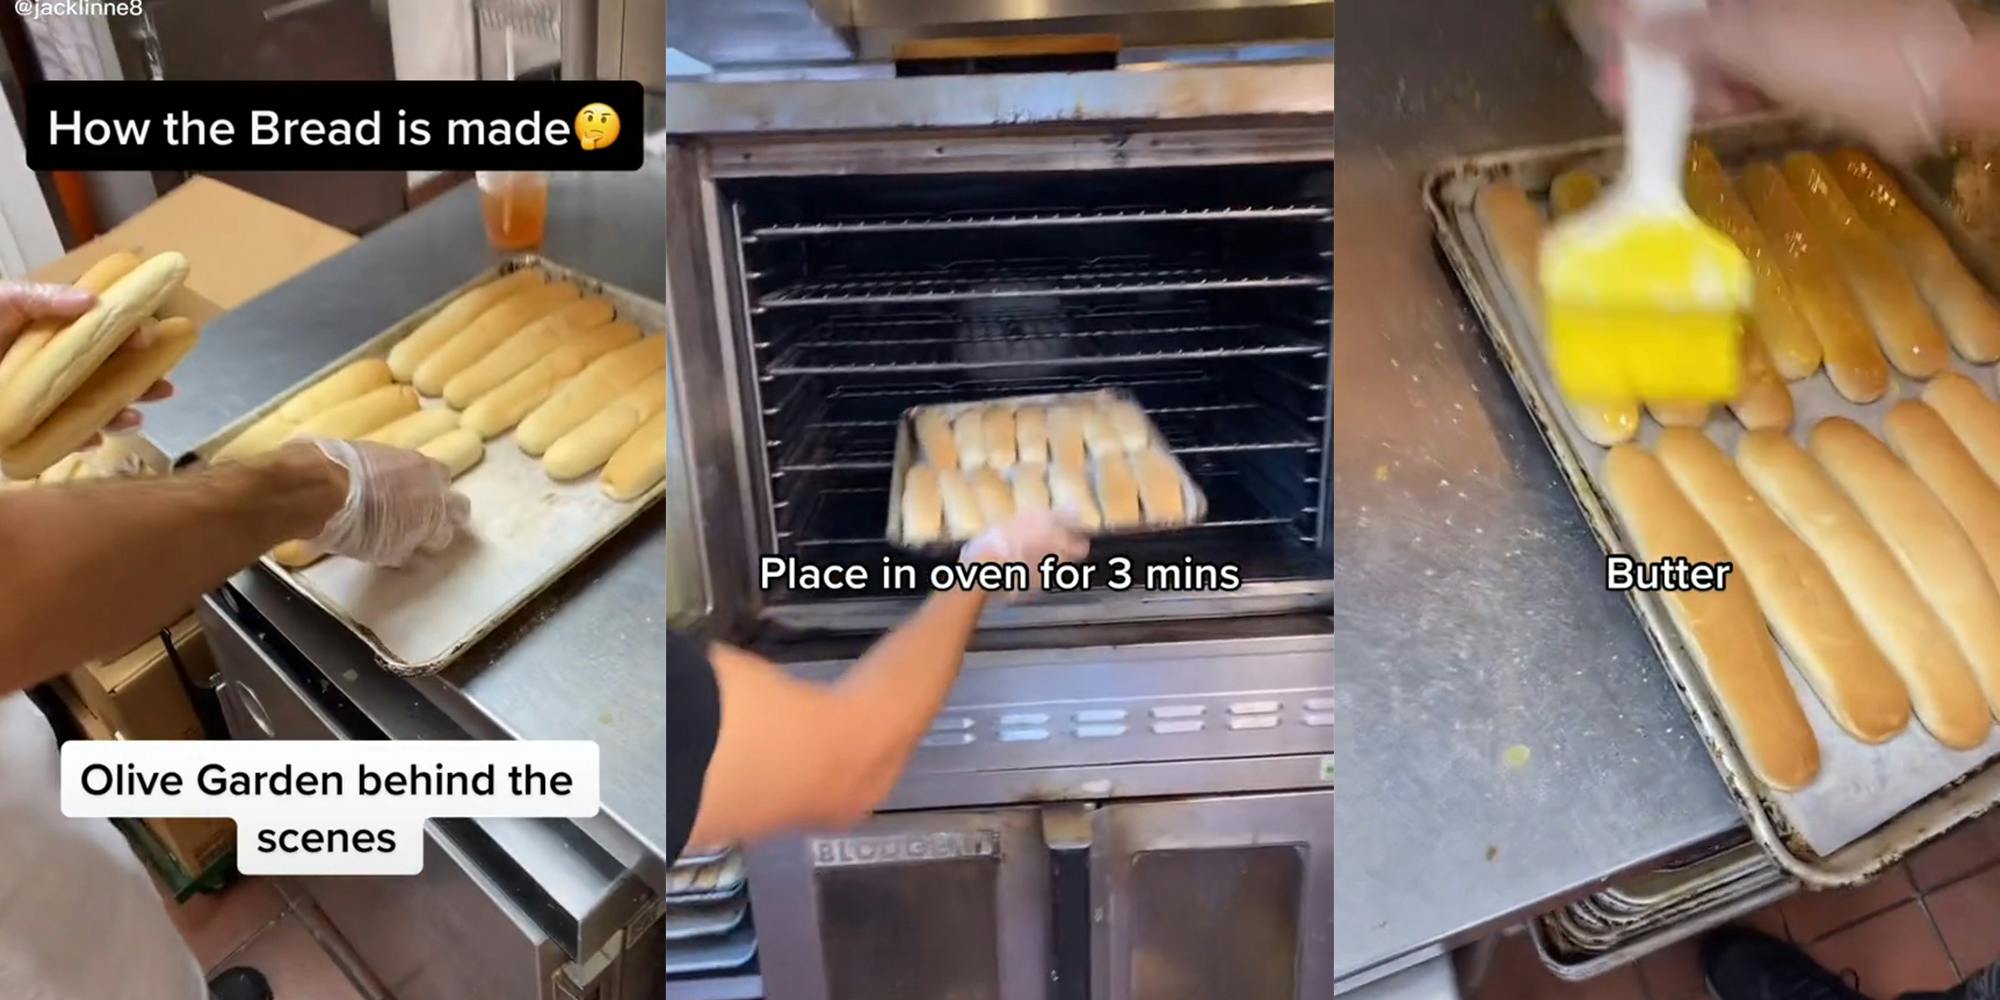 Person placing bread on tray with captions "How the Bread is made" and "Olive Garden behind the scenes" (l) hand placing tray into over with caption "Place in oven for 3 mins" (c) hand painting butter on breadsticks with caption "Butter" (r)